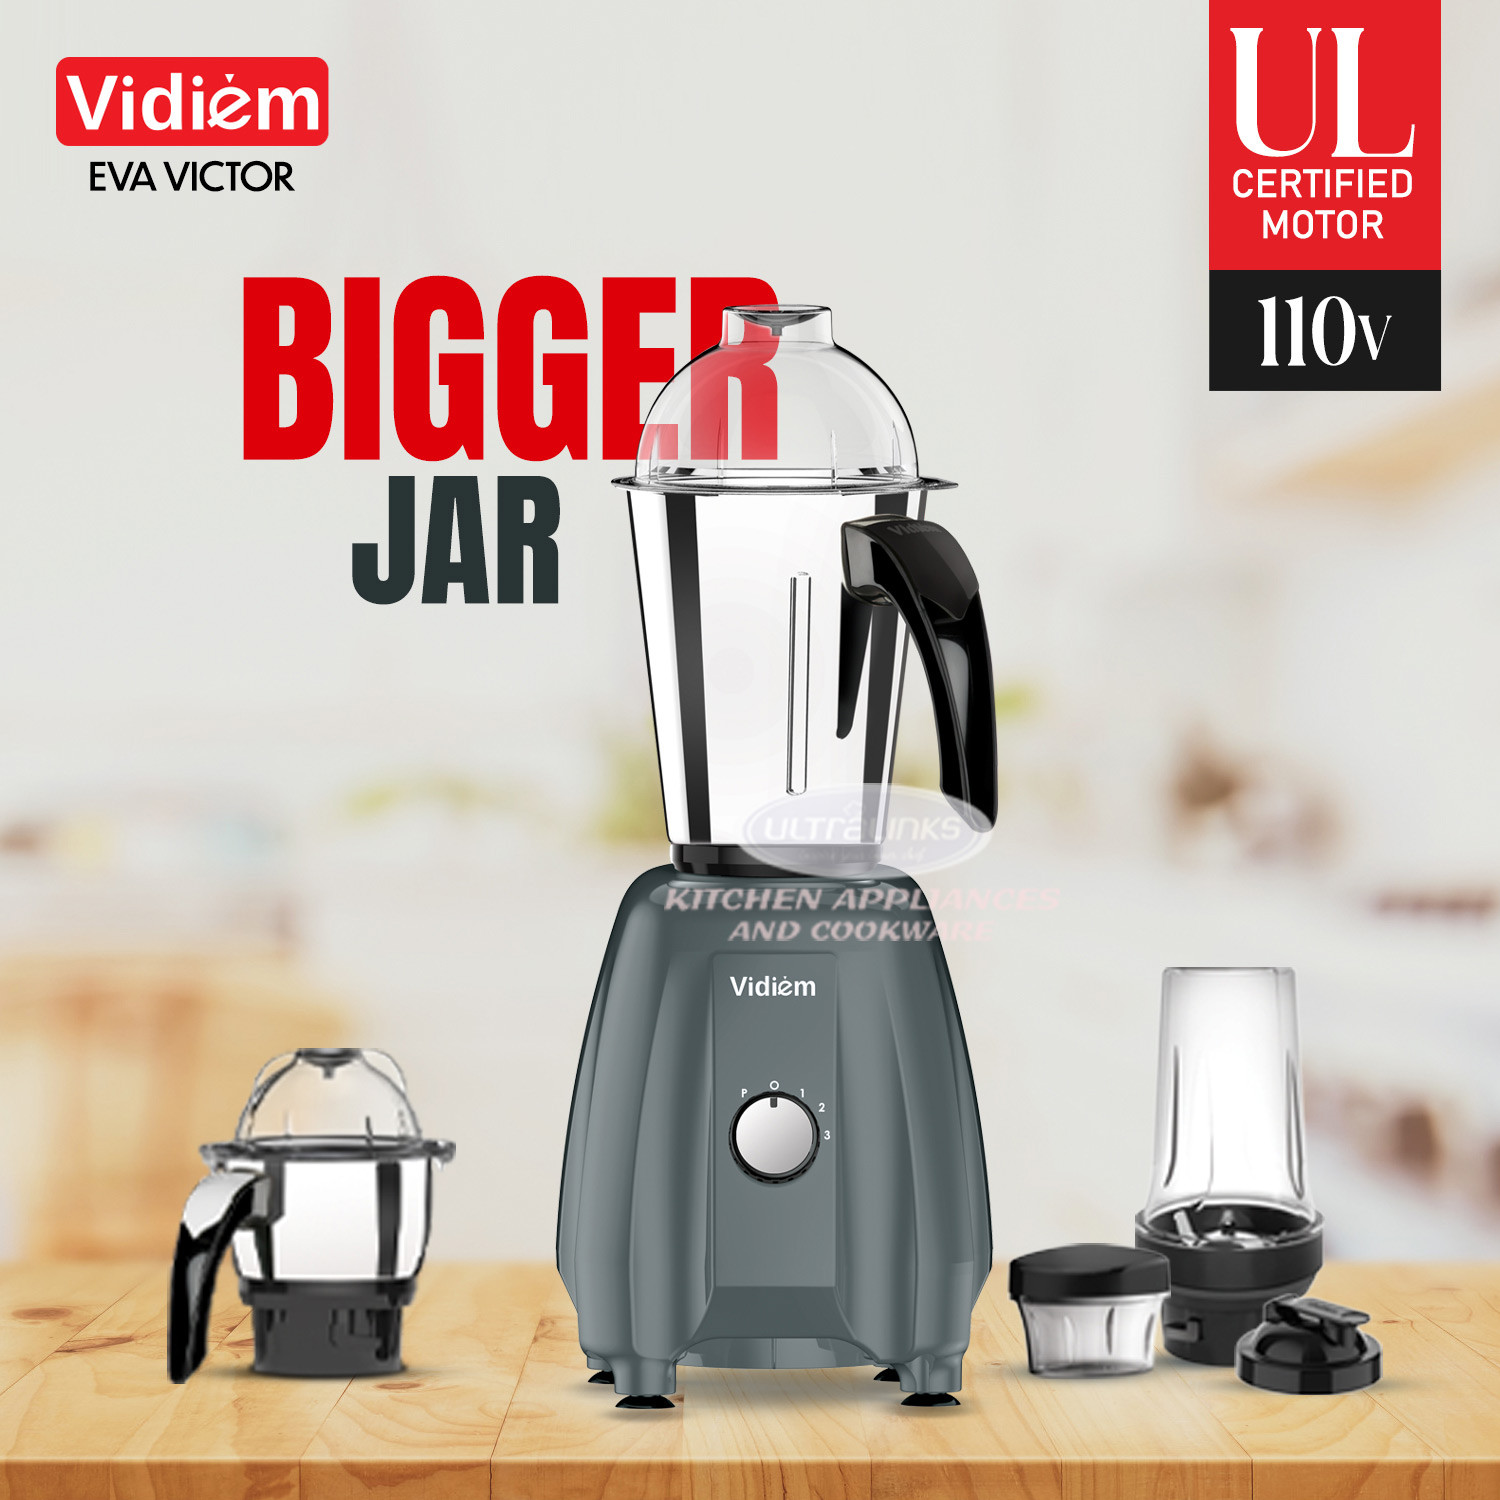 vidiem-eva-victor-pro-650w-110v-indian-mixer-grinder-ss-jars-250ml-spice-personal-coffee-herbs-grinder-with-500ml-personal-juices-shakes-smoothie-blender-made-for-canada-usa5